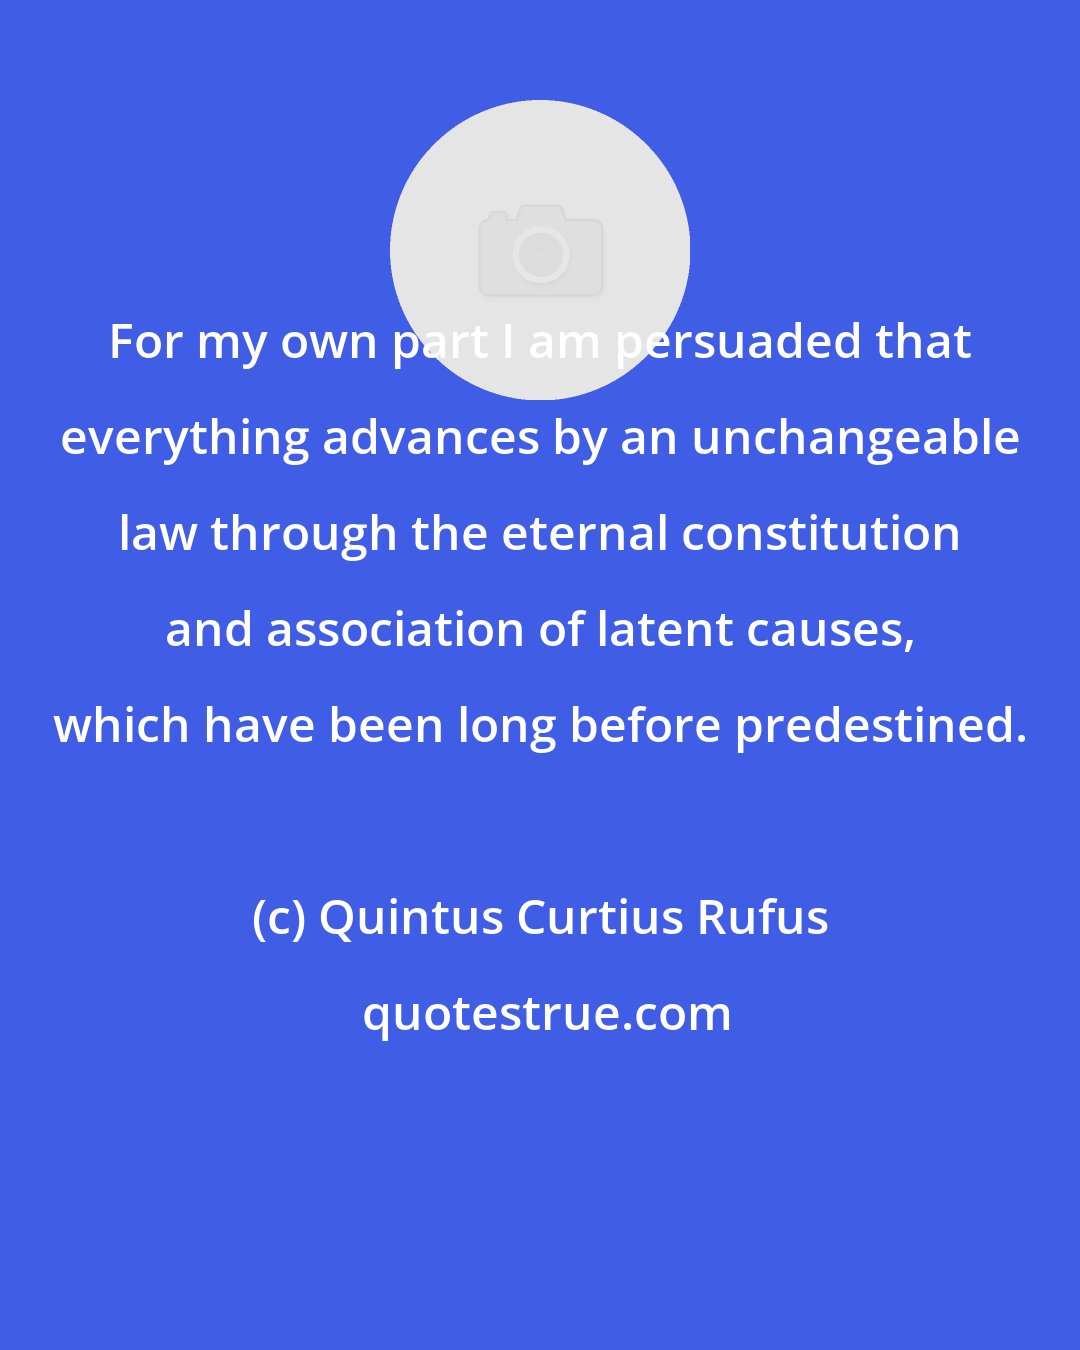 Quintus Curtius Rufus: For my own part I am persuaded that everything advances by an unchangeable law through the eternal constitution and association of latent causes, which have been long before predestined.